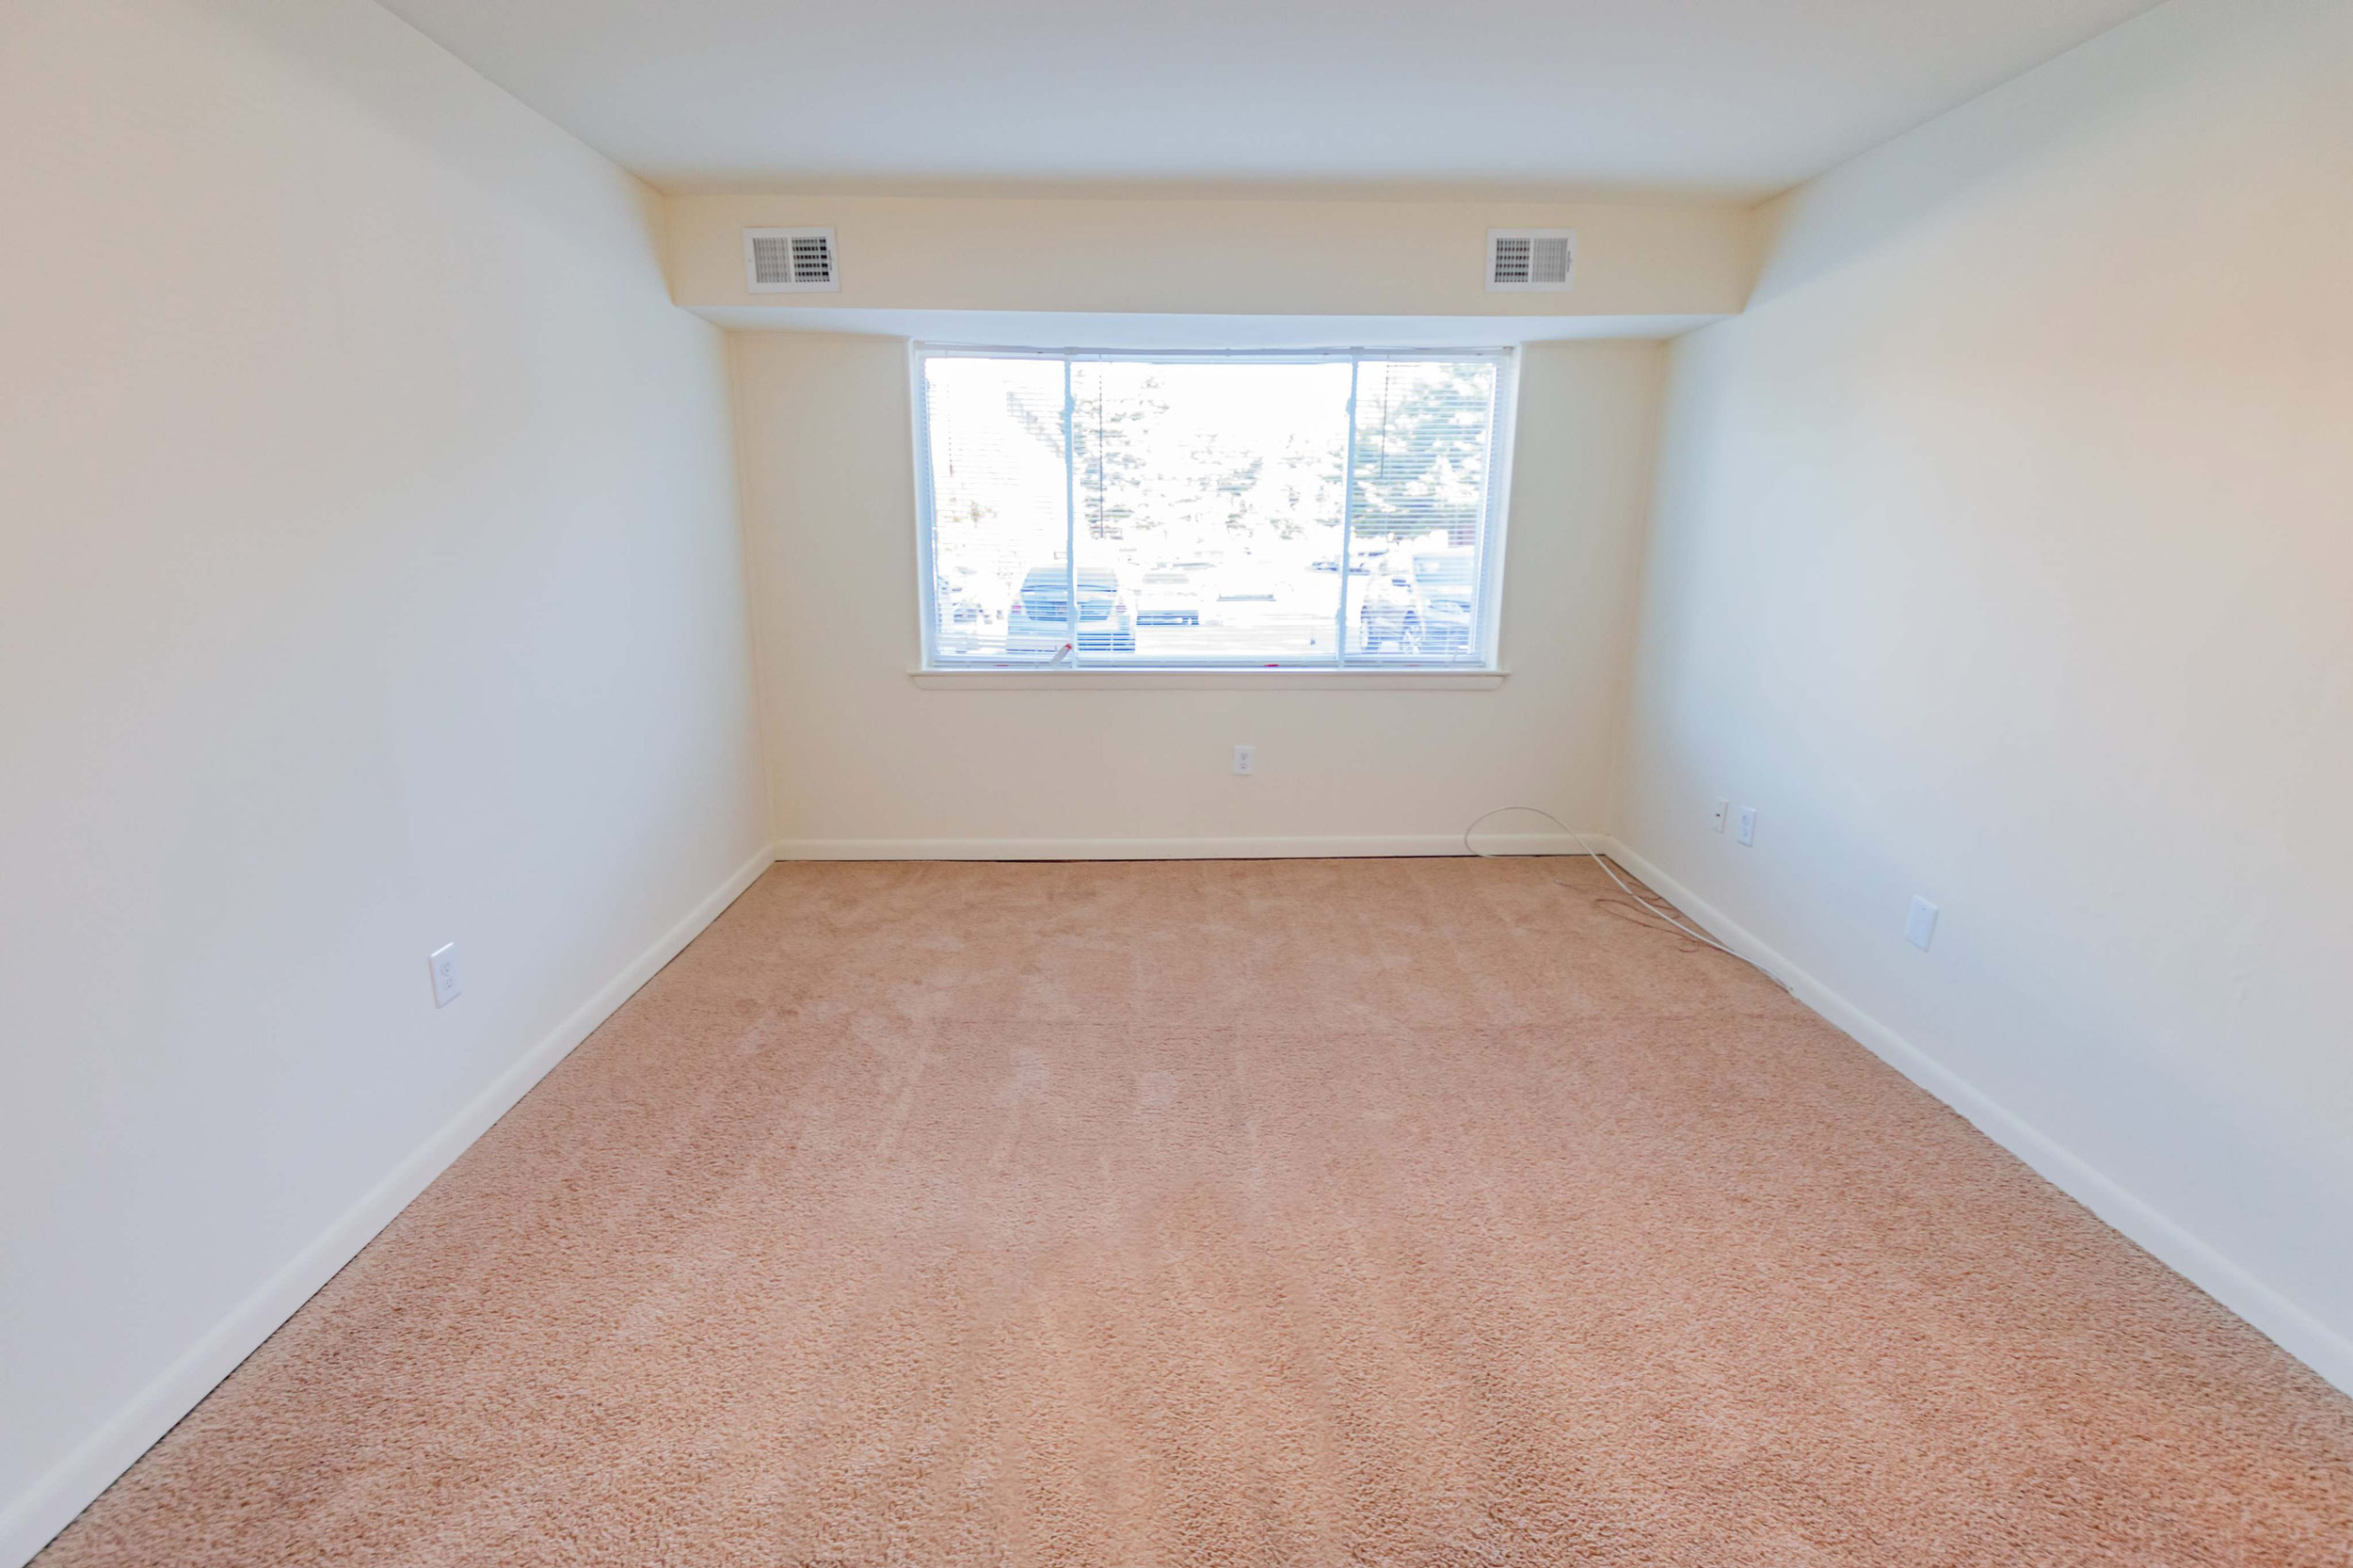 Bedroom area of an apartment unfurnished, fitted with carpet flooring, air vents, and a huge window